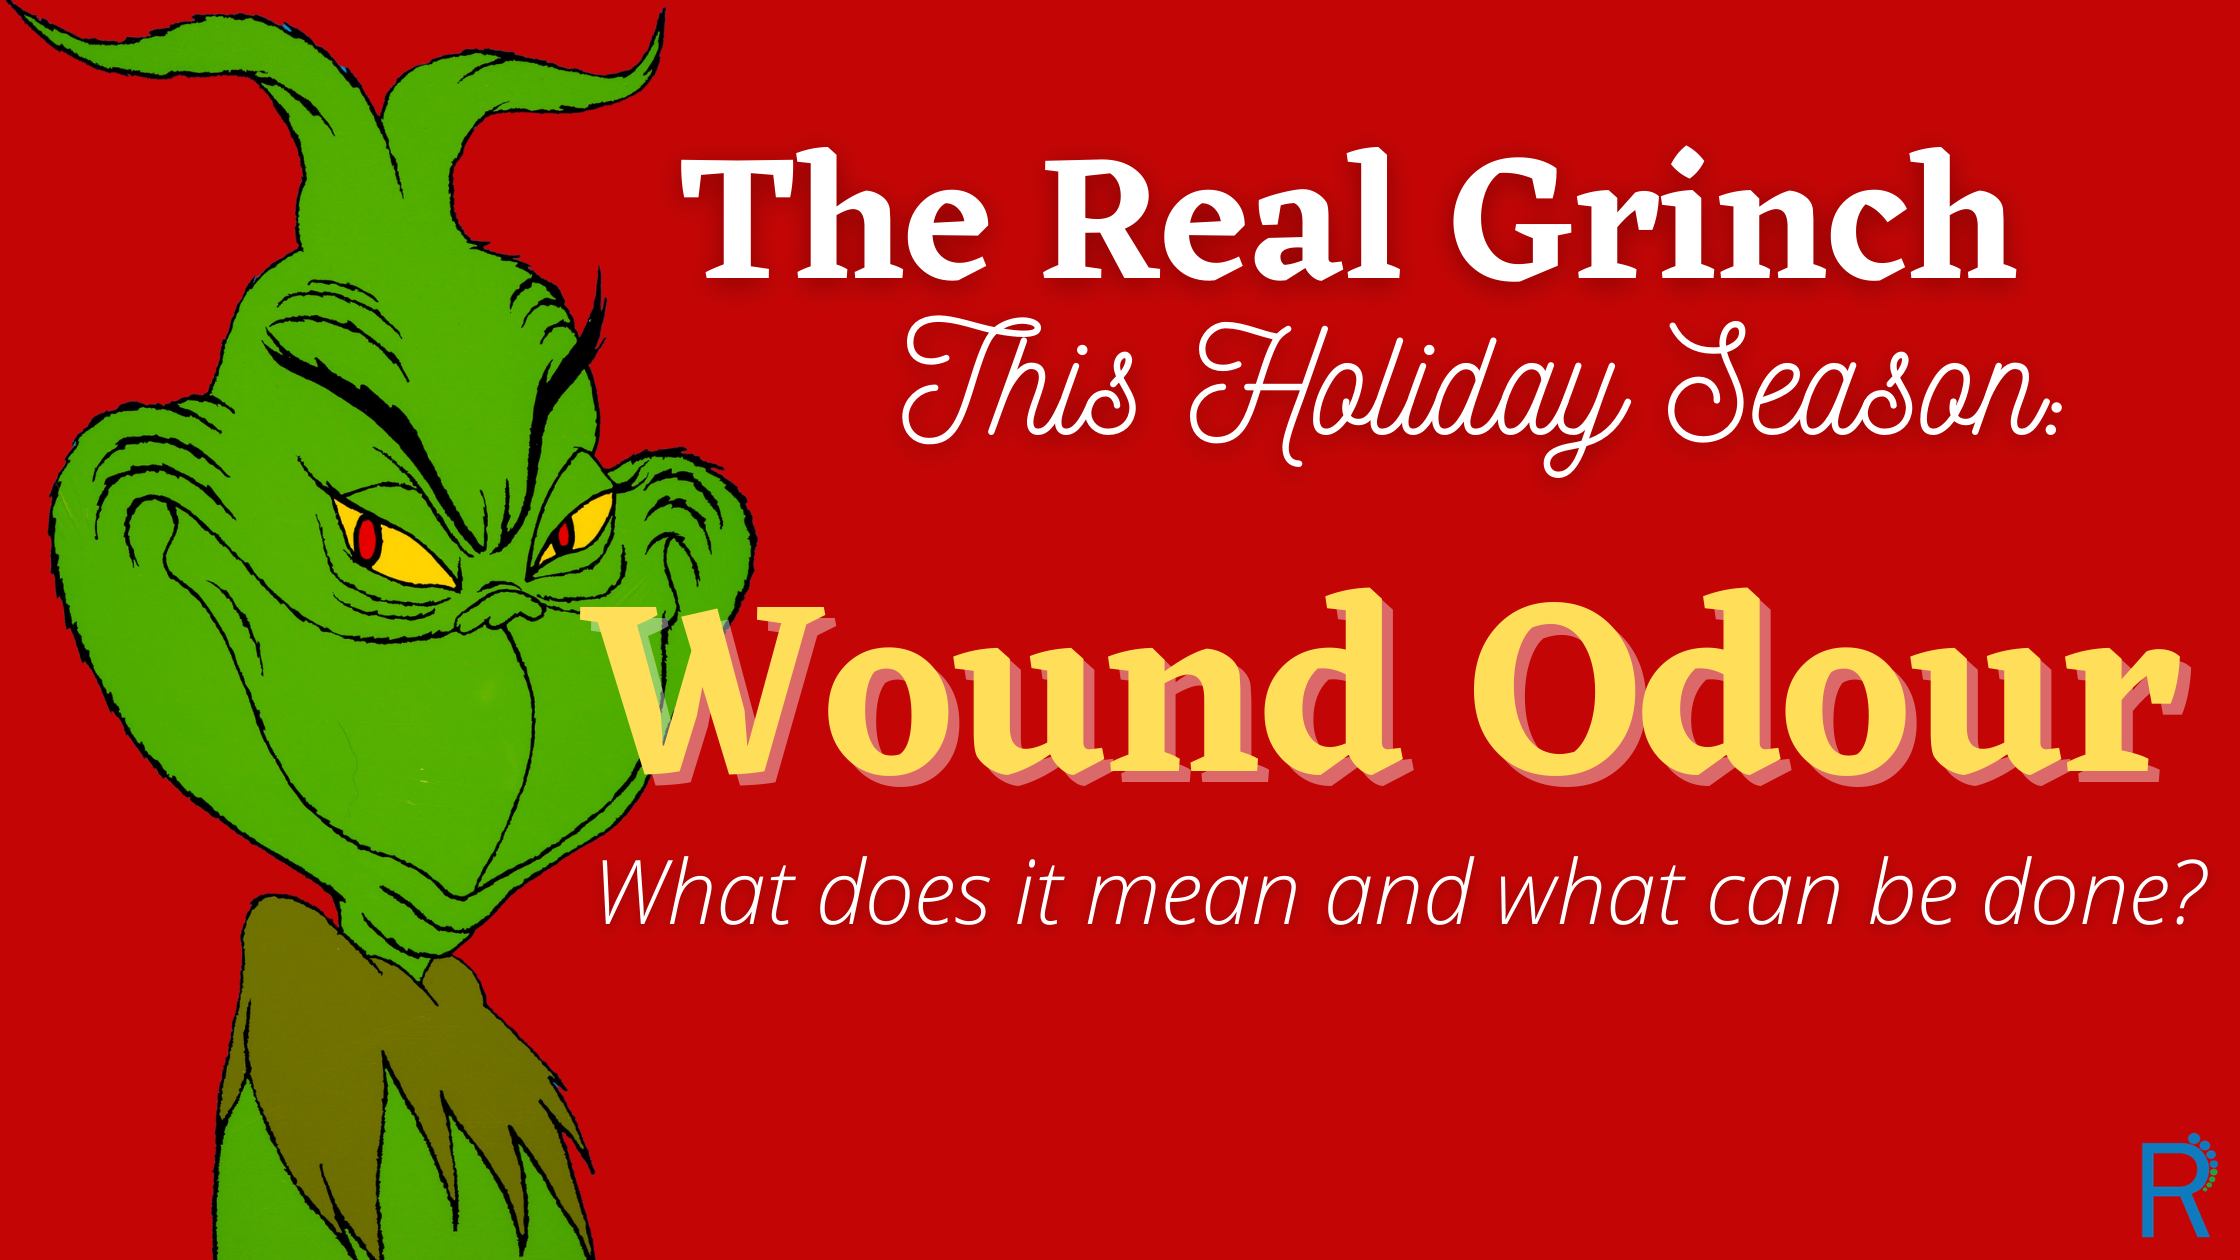 The Real Grinch This Holiday Season: Wound Odour – What does it mean and what can be done?